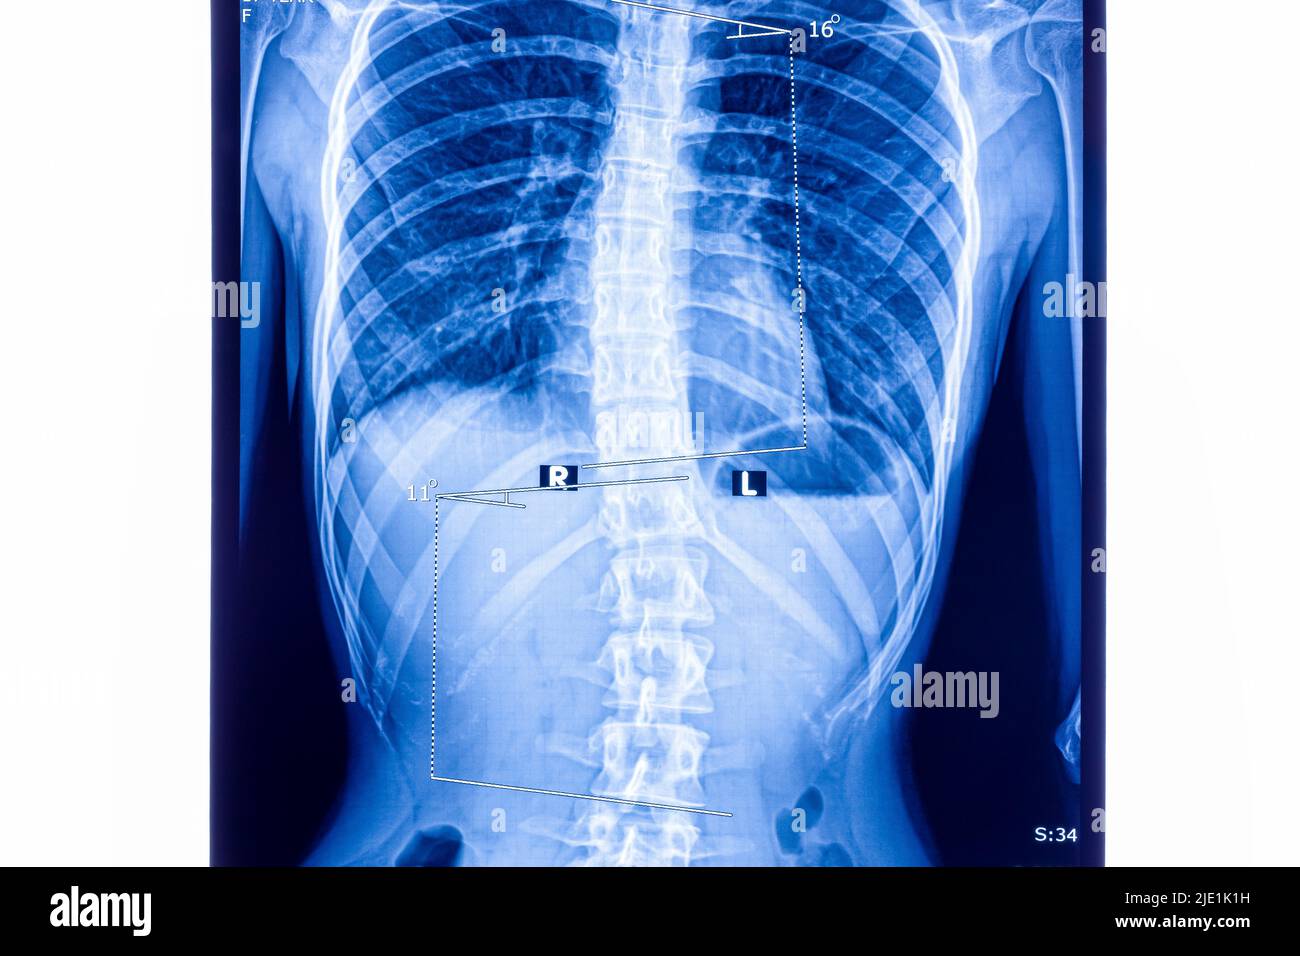 X ray showing scoliosis of the lumbar spine. Scoliosis is an abnormal lateral curvature of the spine. Zoom in. Stock Photo